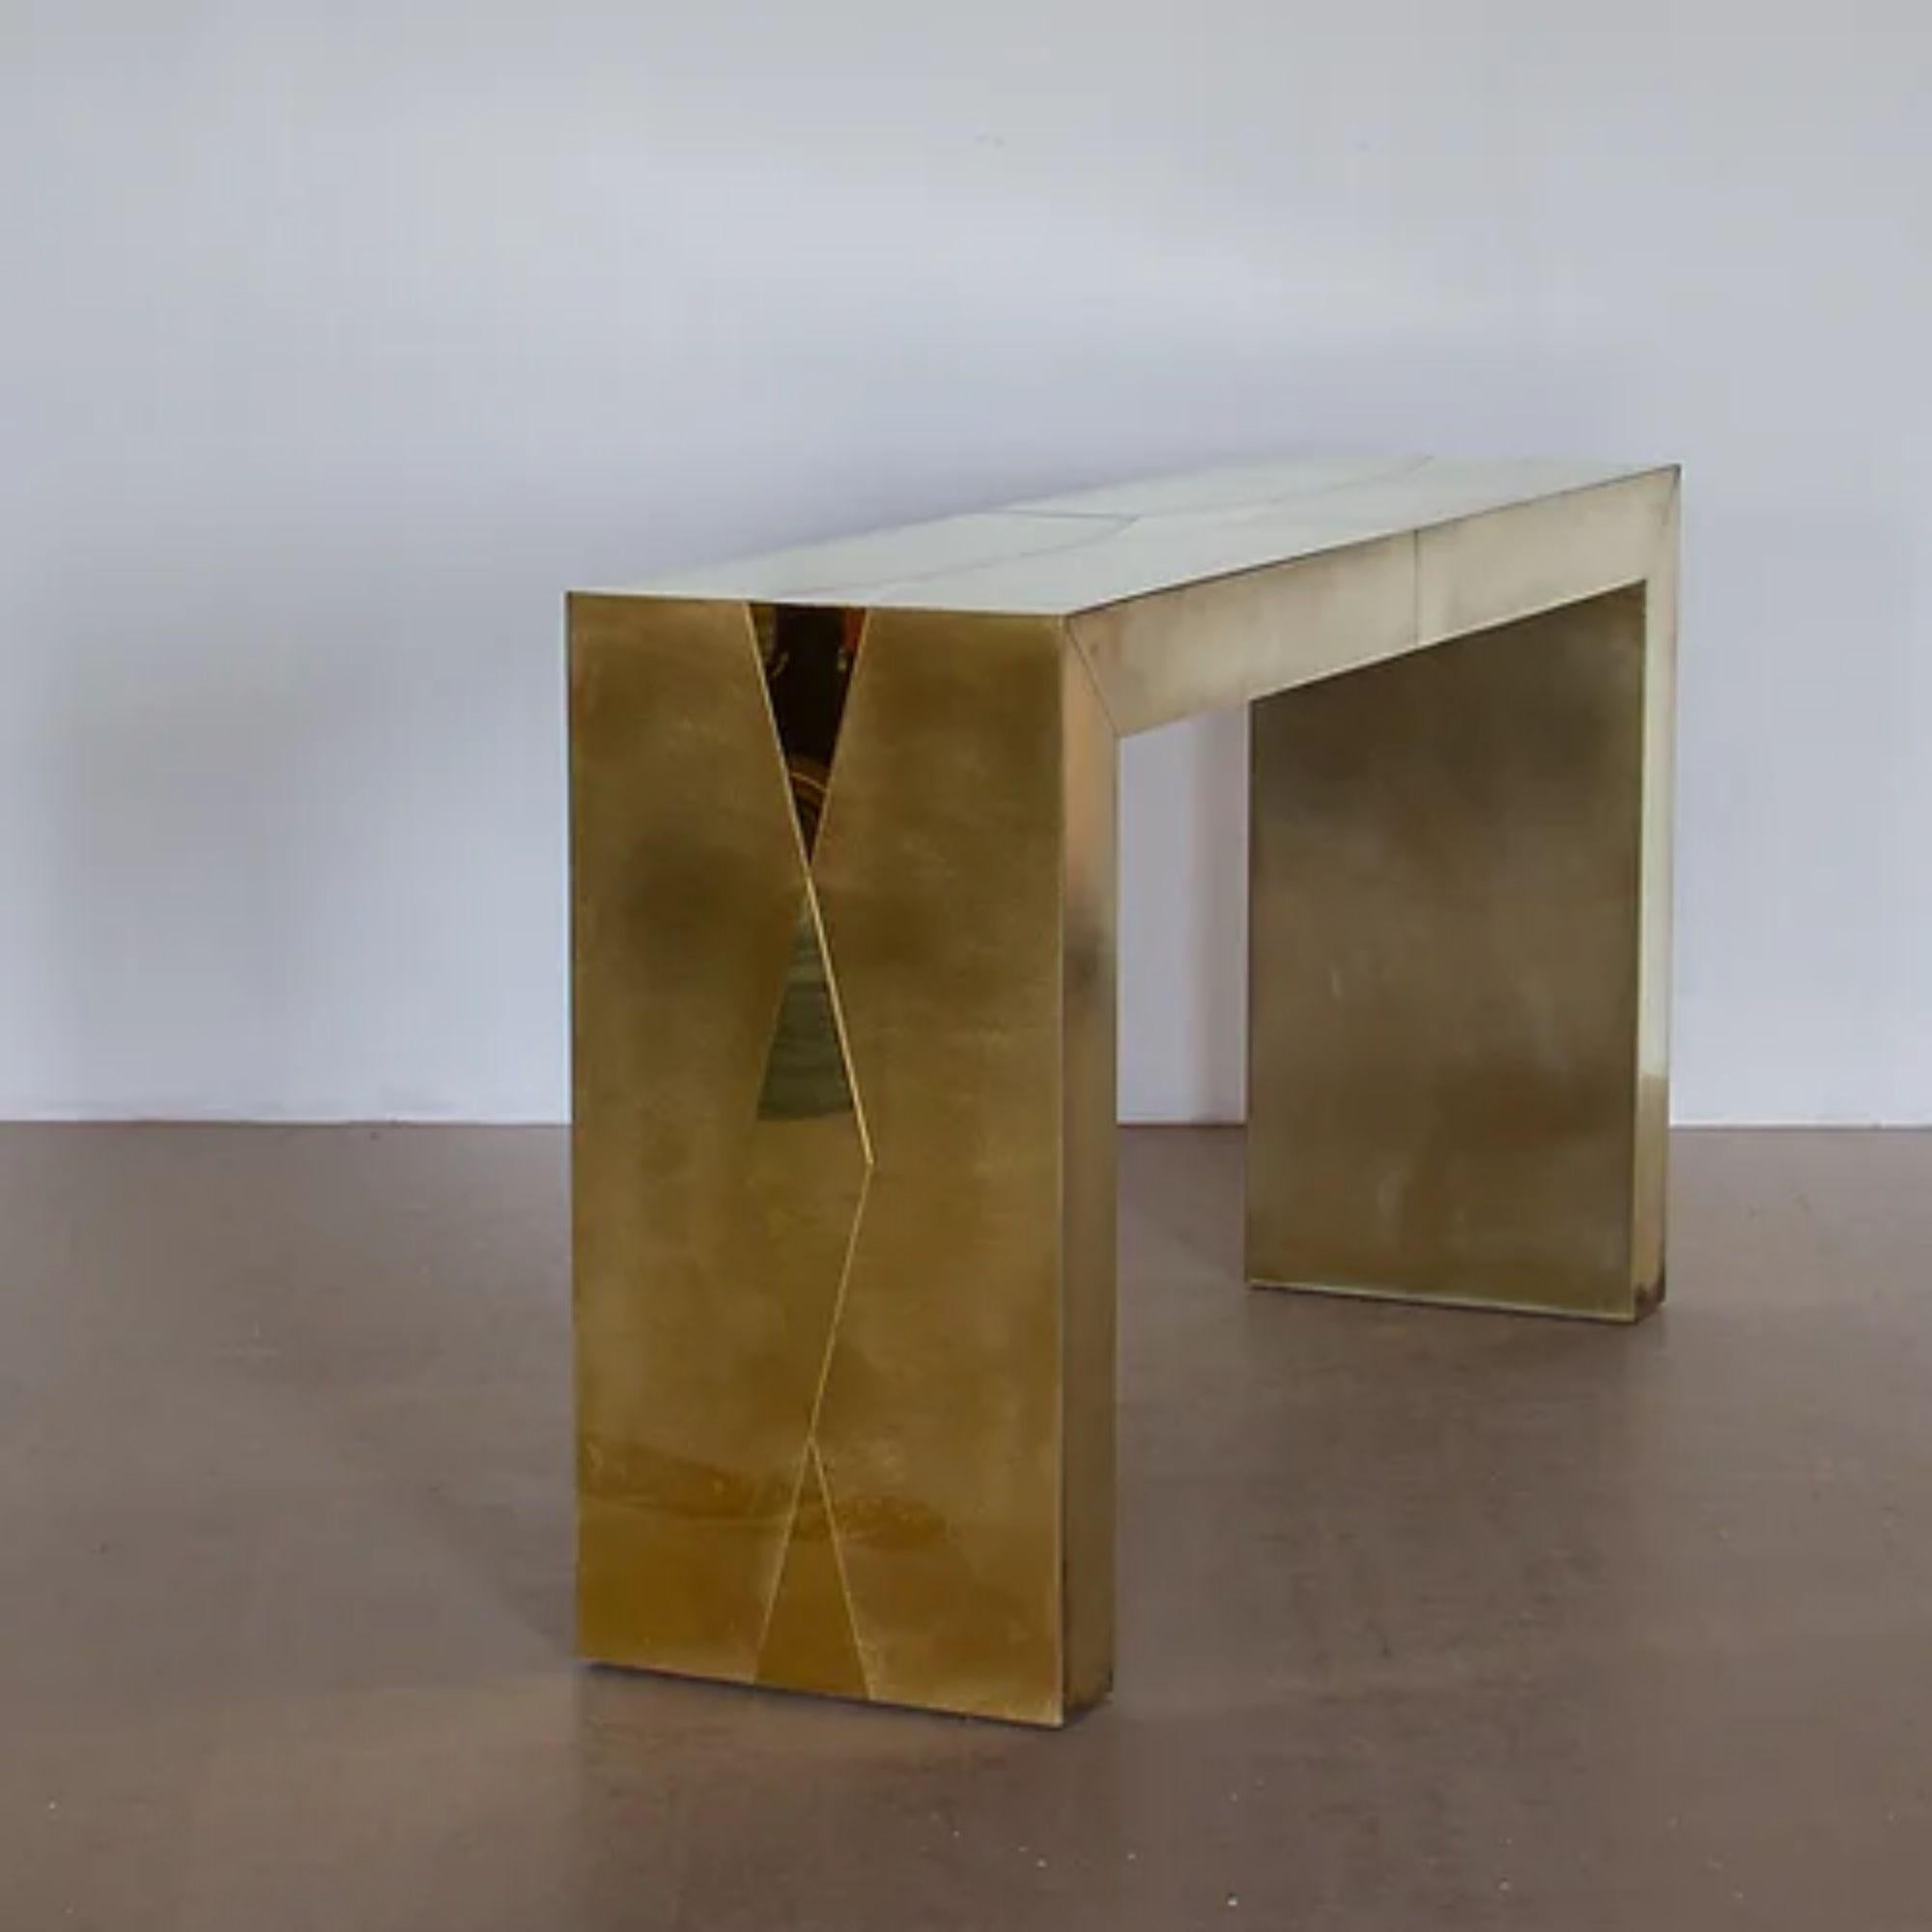 A bespoke matt brass console with polished brass diamond inlays, created by Ken Bolan Studio.

Additional Information:
Material: Brass